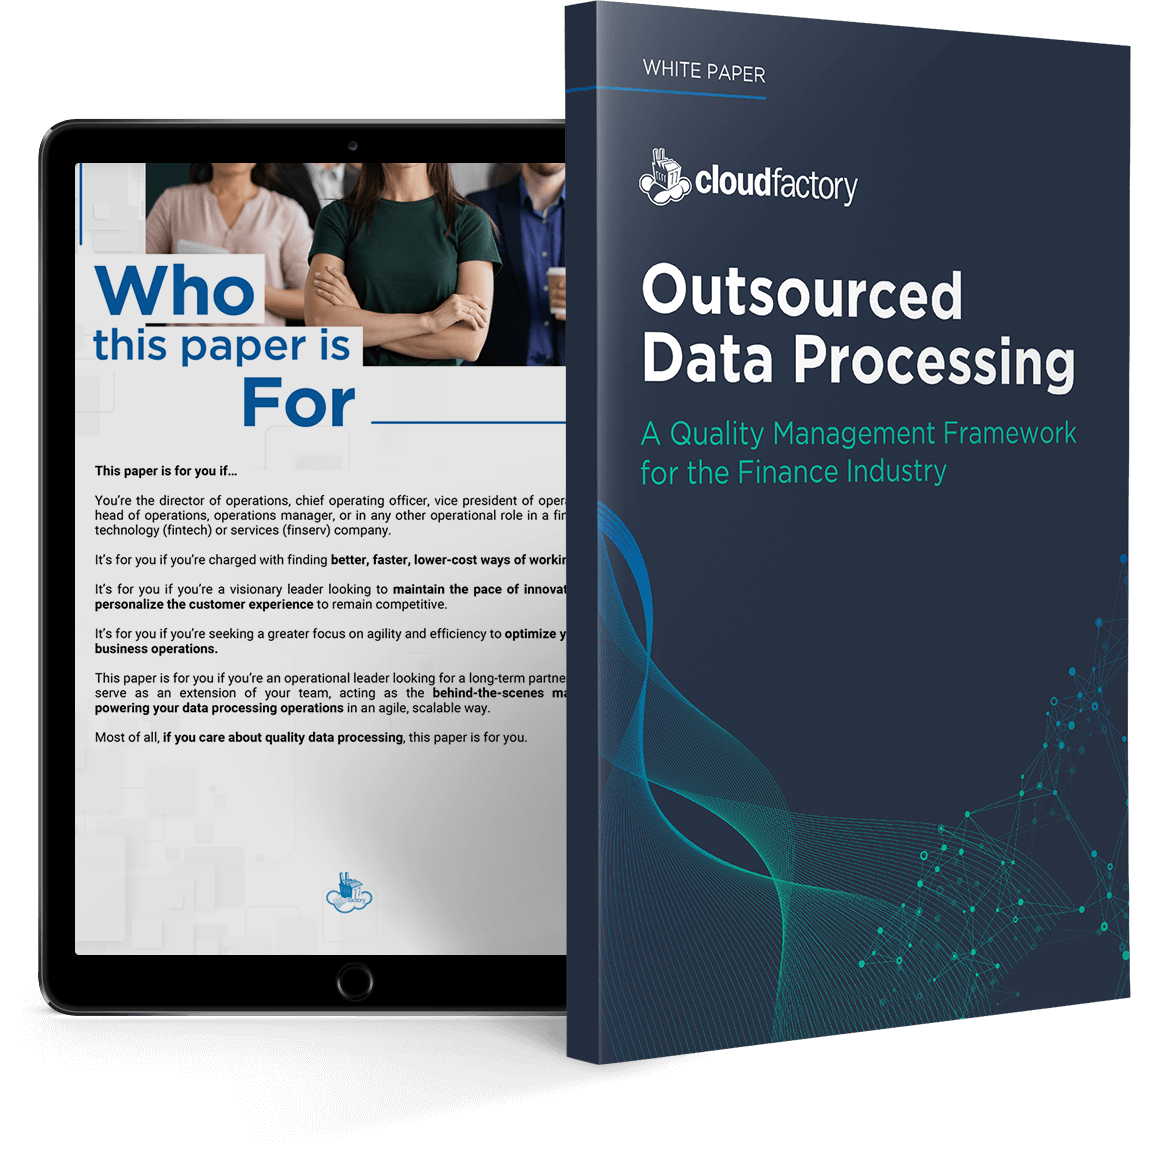 Outsourced Data Processing: A Quality Management Framework for the Finance Industry